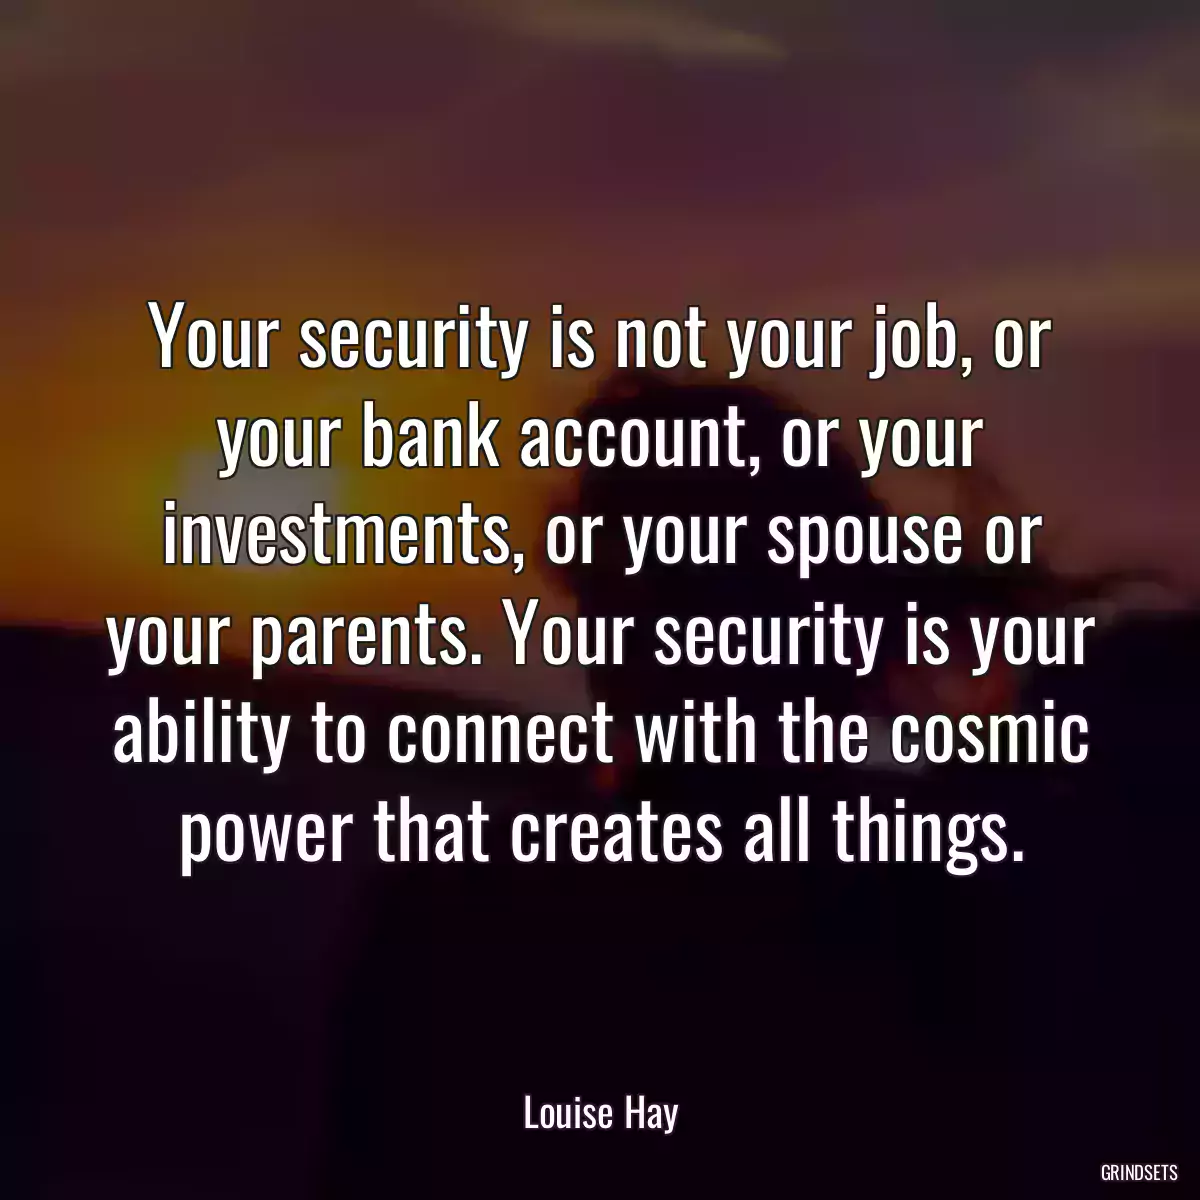 Your security is not your job, or your bank account, or your investments, or your spouse or your parents. Your security is your ability to connect with the cosmic power that creates all things.